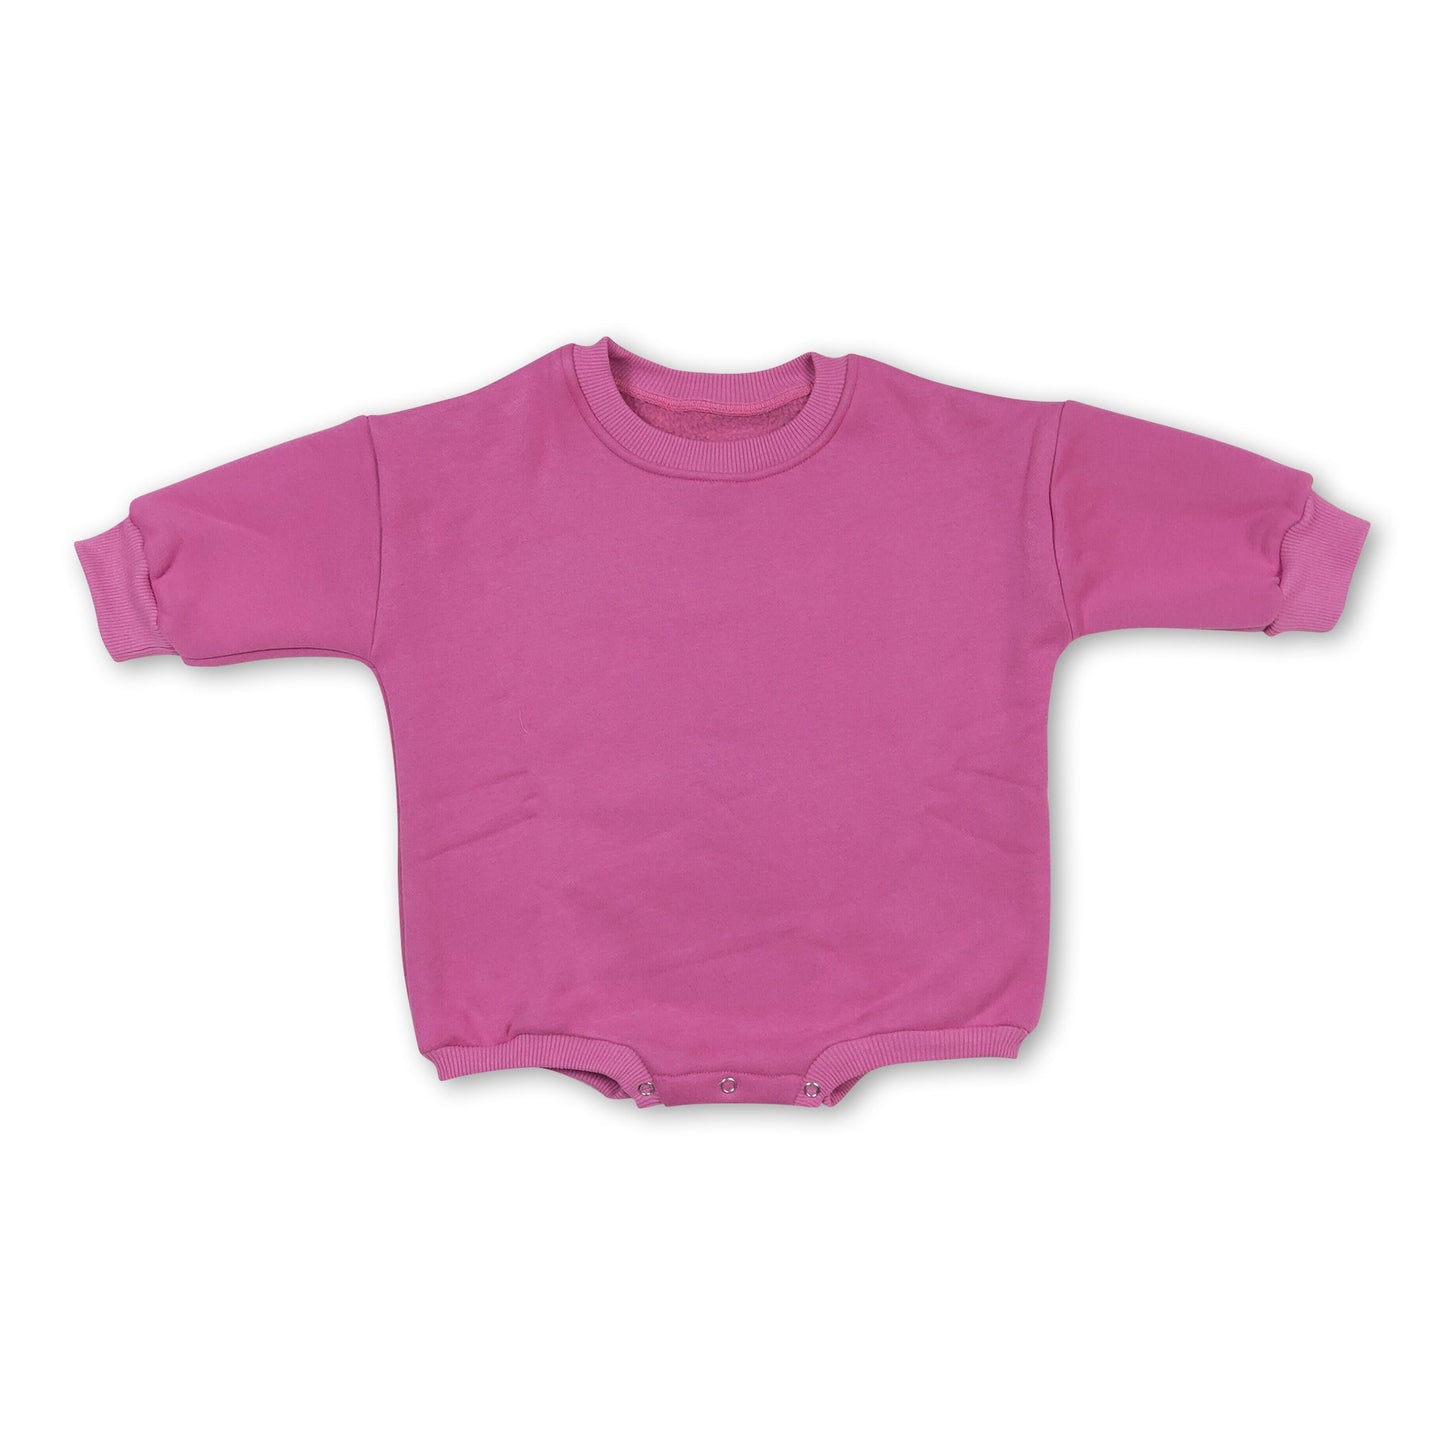 Hot pink long sleeves cotton baby girls sweat romper